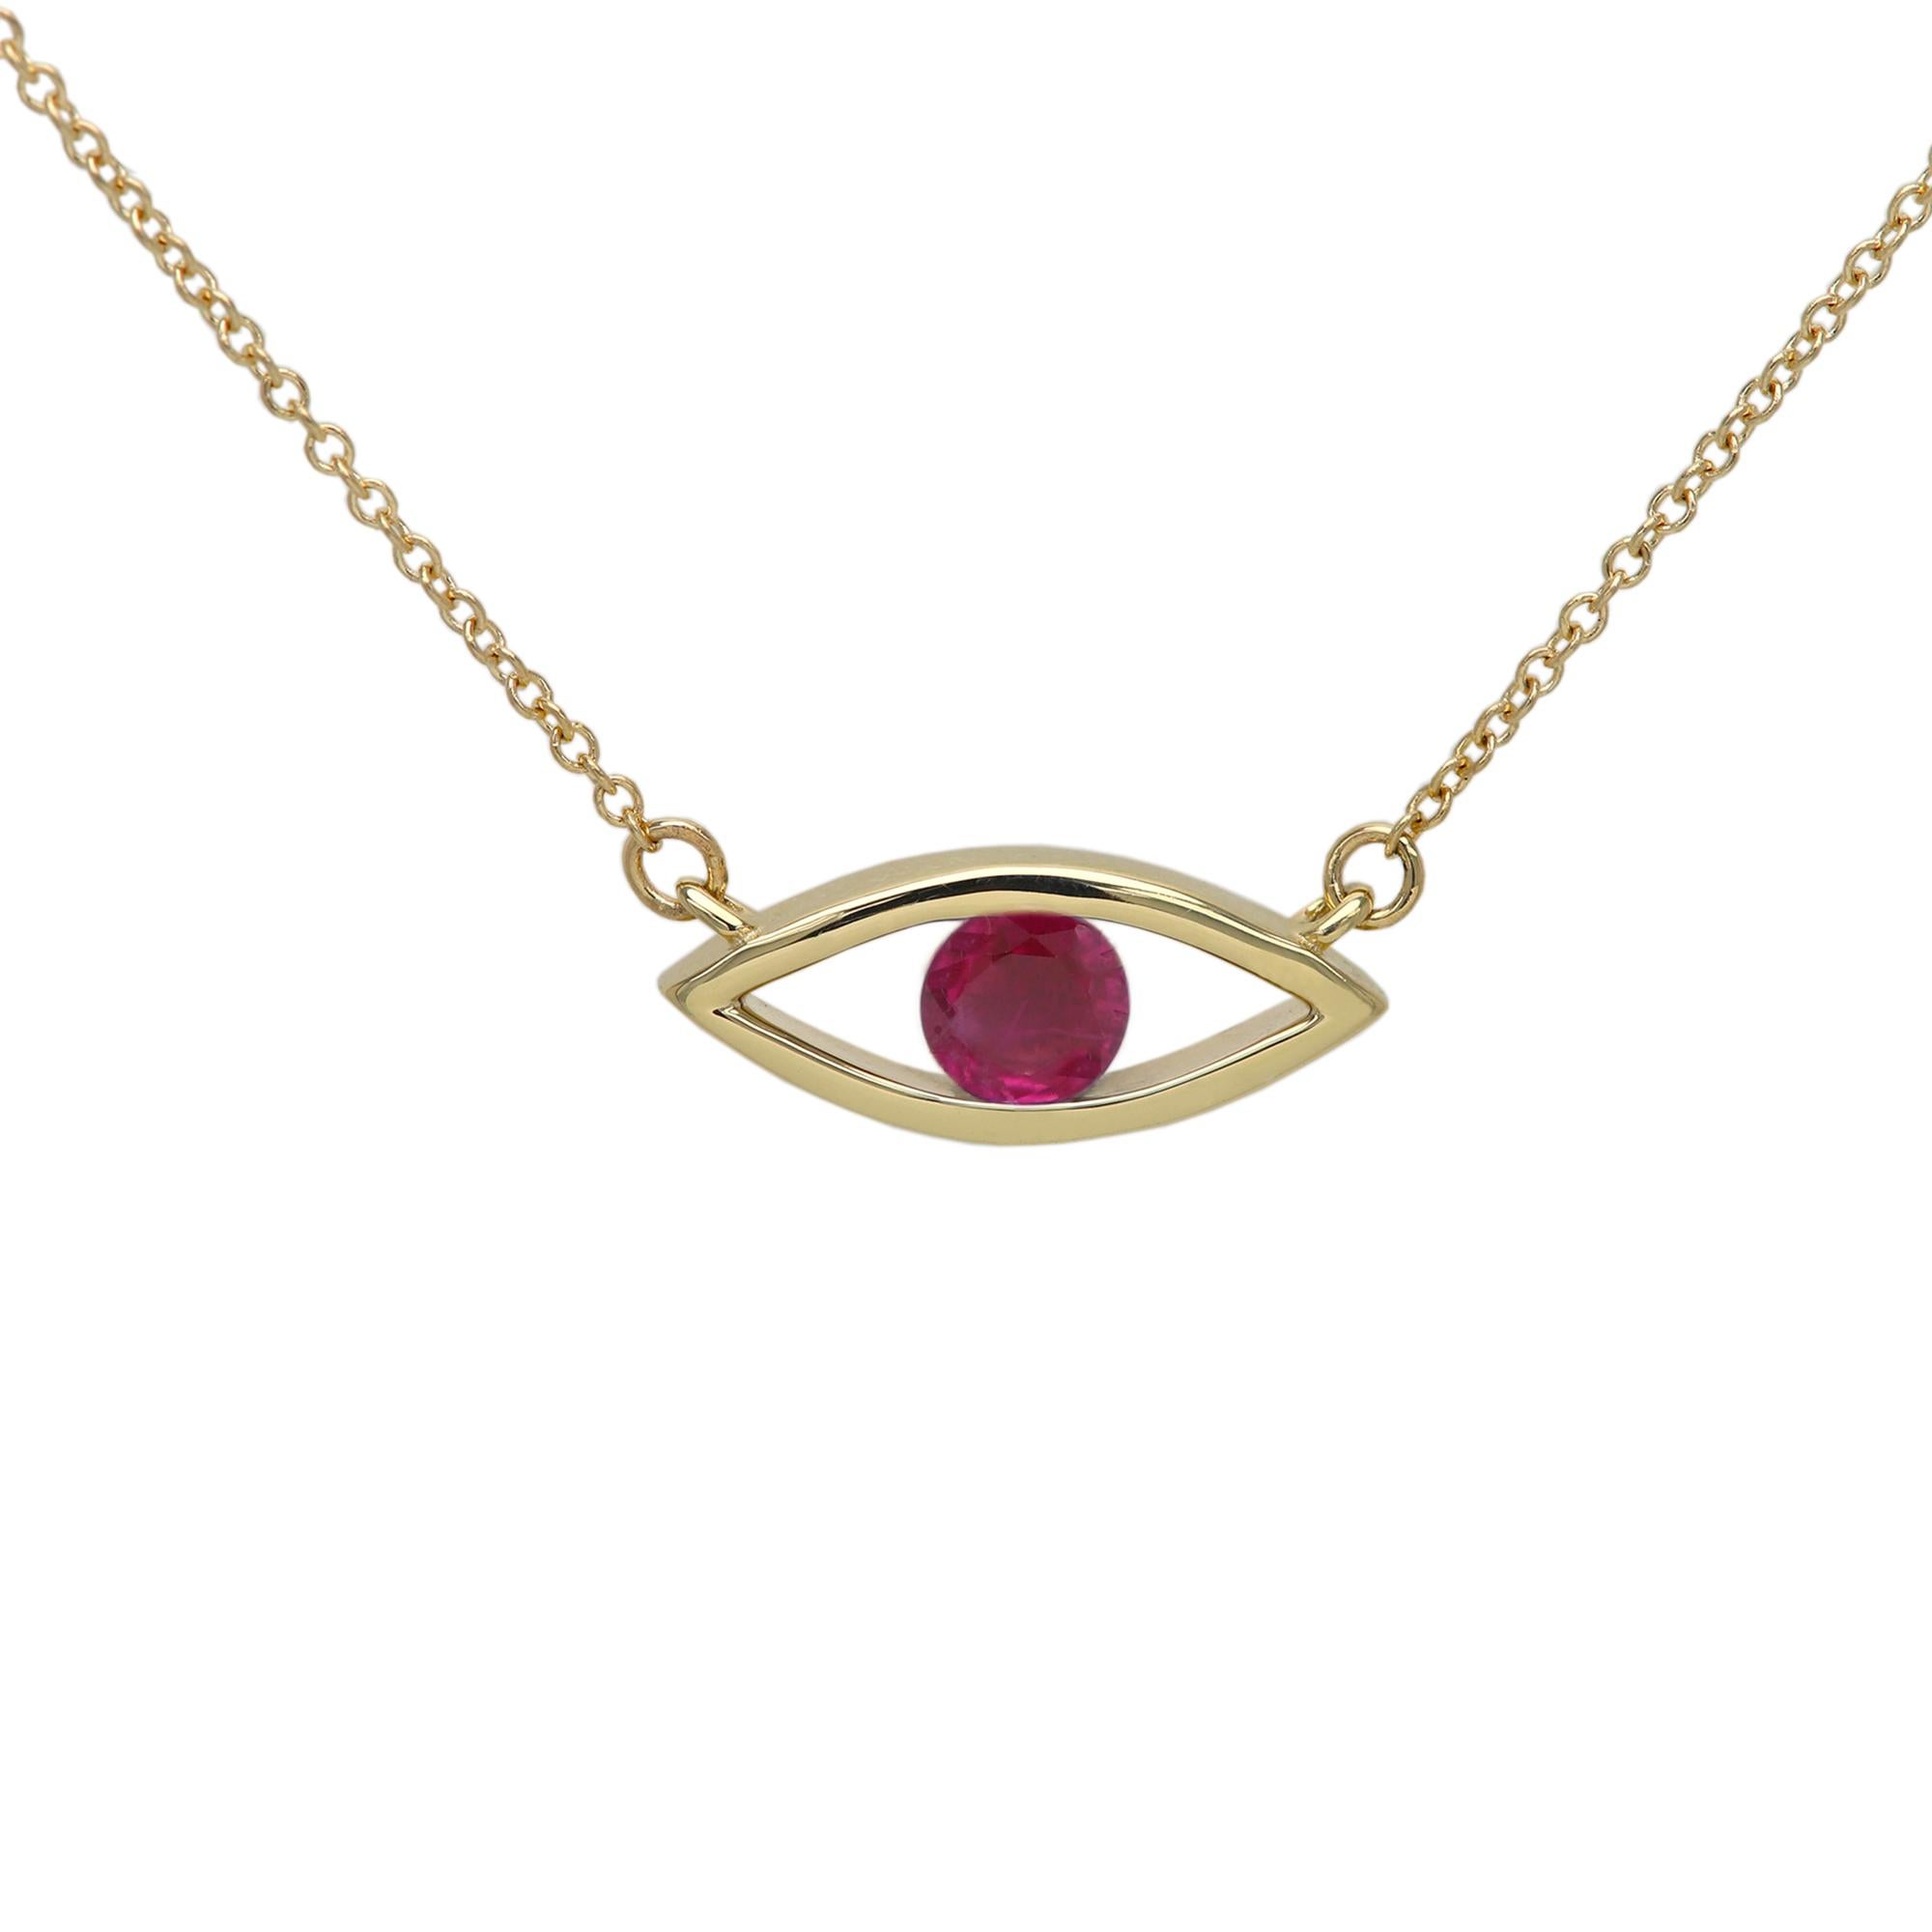 New, Very Elegant & Lovely Evil Eye Birthstone Necklace Solid 14k Yellow Gold with Natural Ruby gemstone 
Set in Yellow Gold Evil Eye - Good Luck & protection Necklace
Classic Cable Chain and Lobster Lock - all 14k, 
Chain Length - as your own